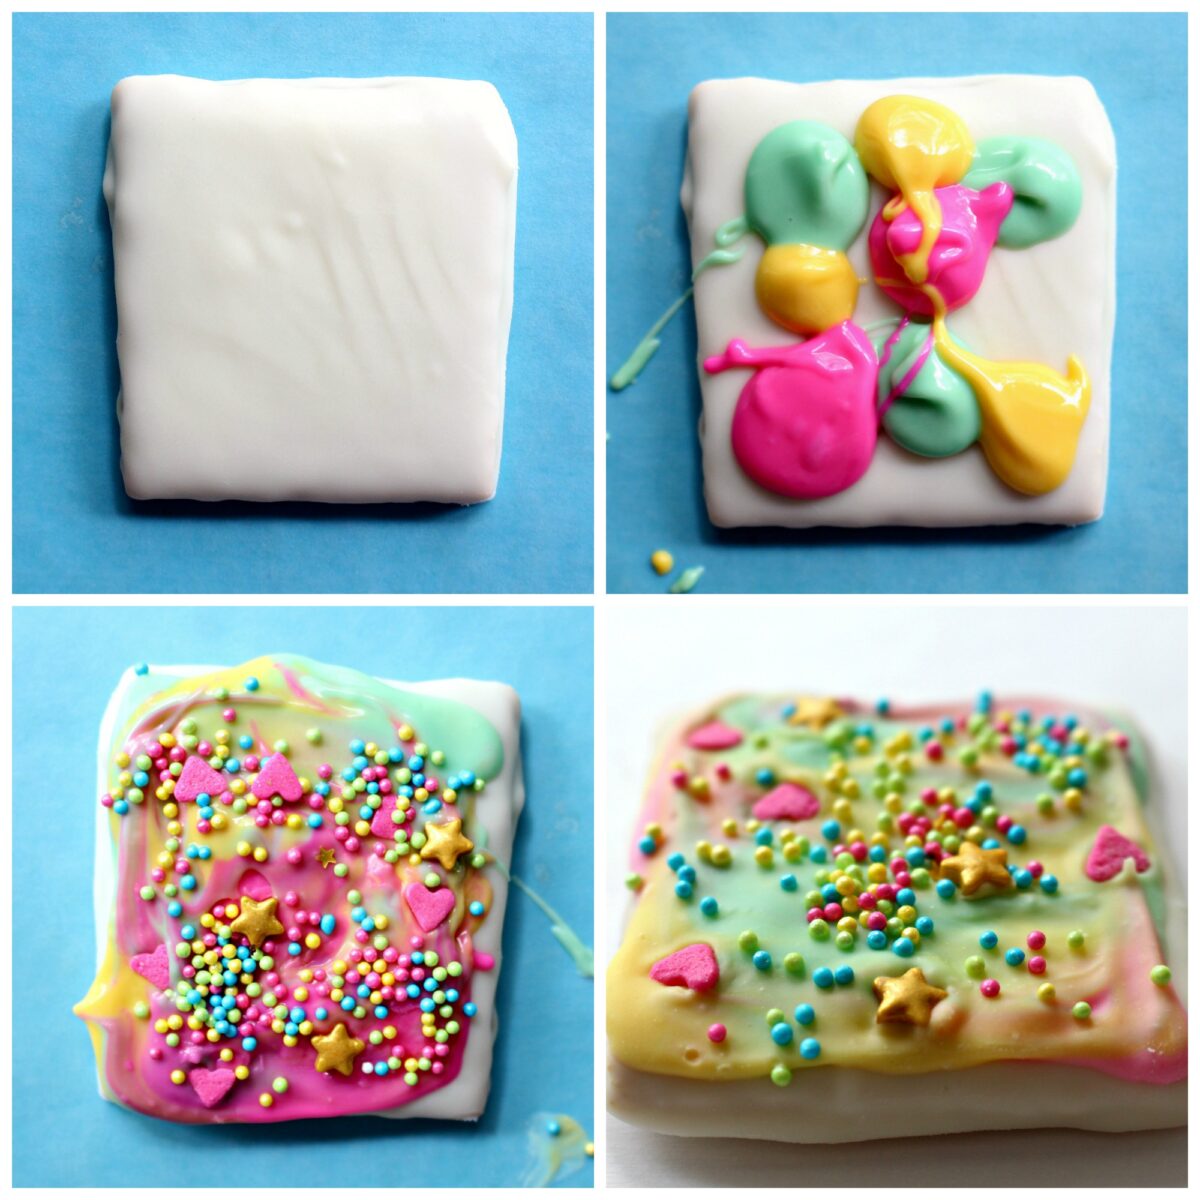 Instructions: coat in white chocolate, add colored white chocolate, add sprinkles.